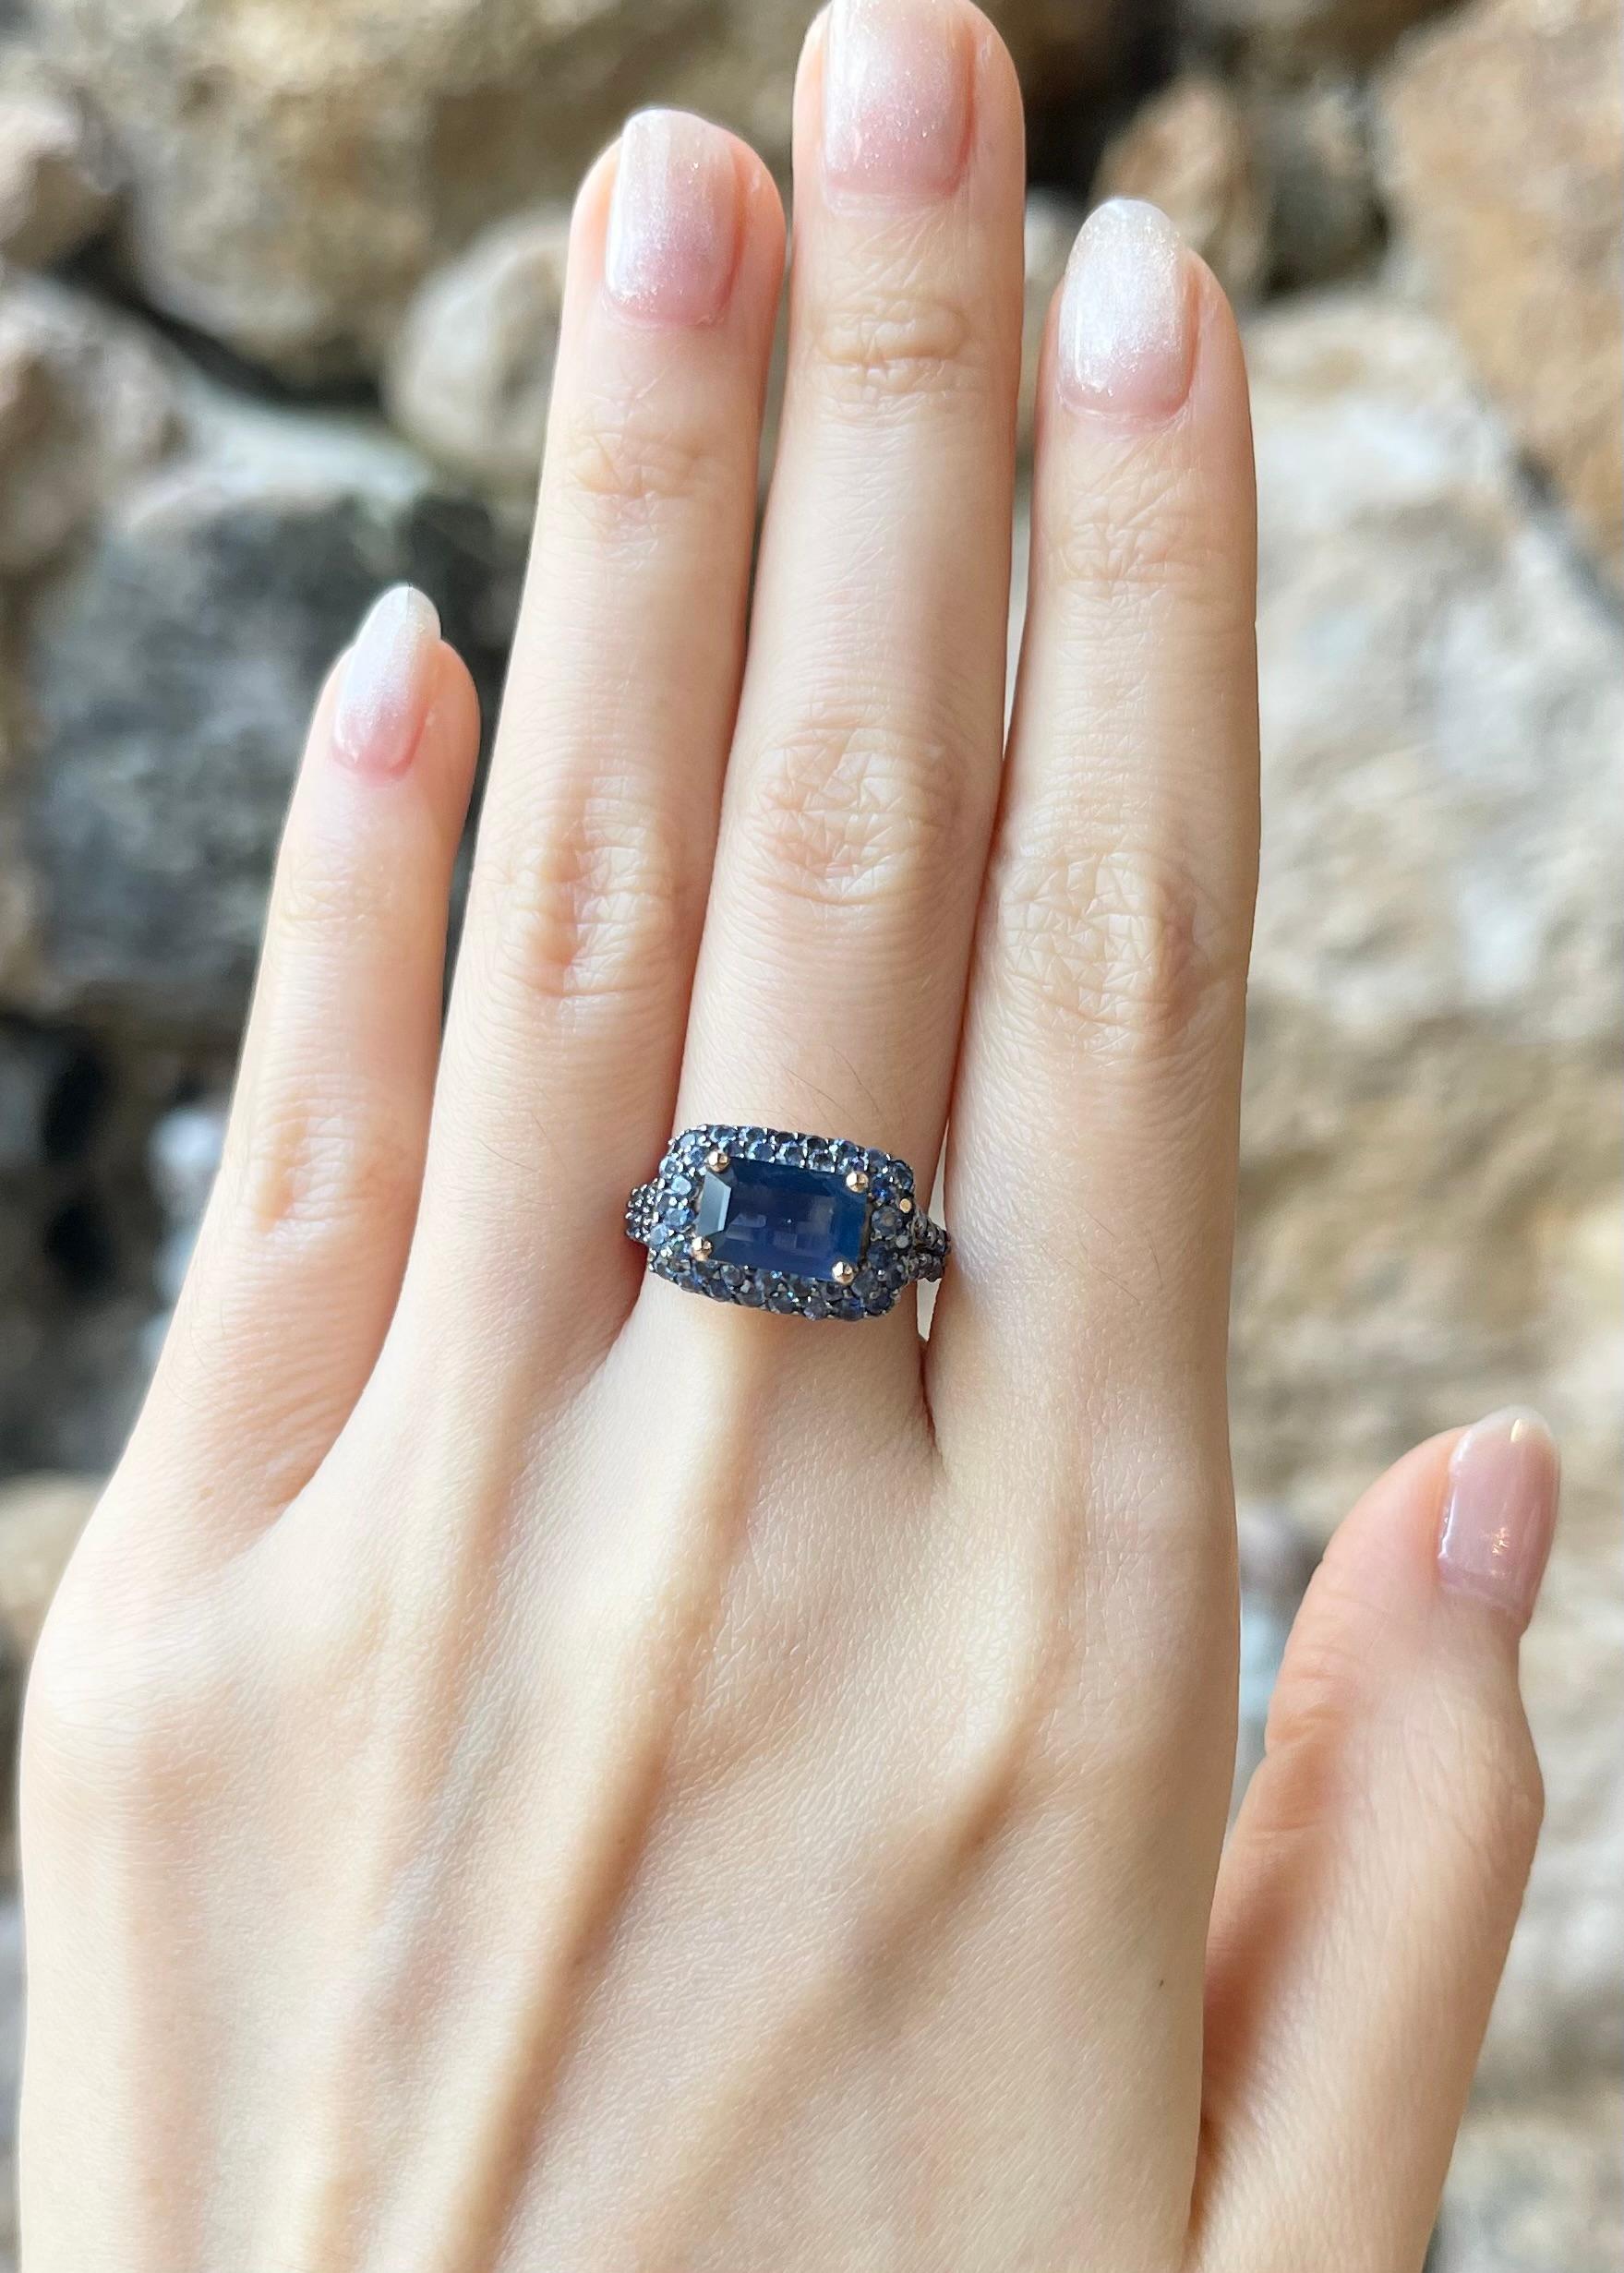 Blue Sapphire 1.74 carats and Blue Sapphire 1.35 carat Ring set in 18K Rose Gold Settings

Width:  1.5 cm 
Length: 1.0 cm
Ring Size: 53
Total Weight: 5.61 grams

